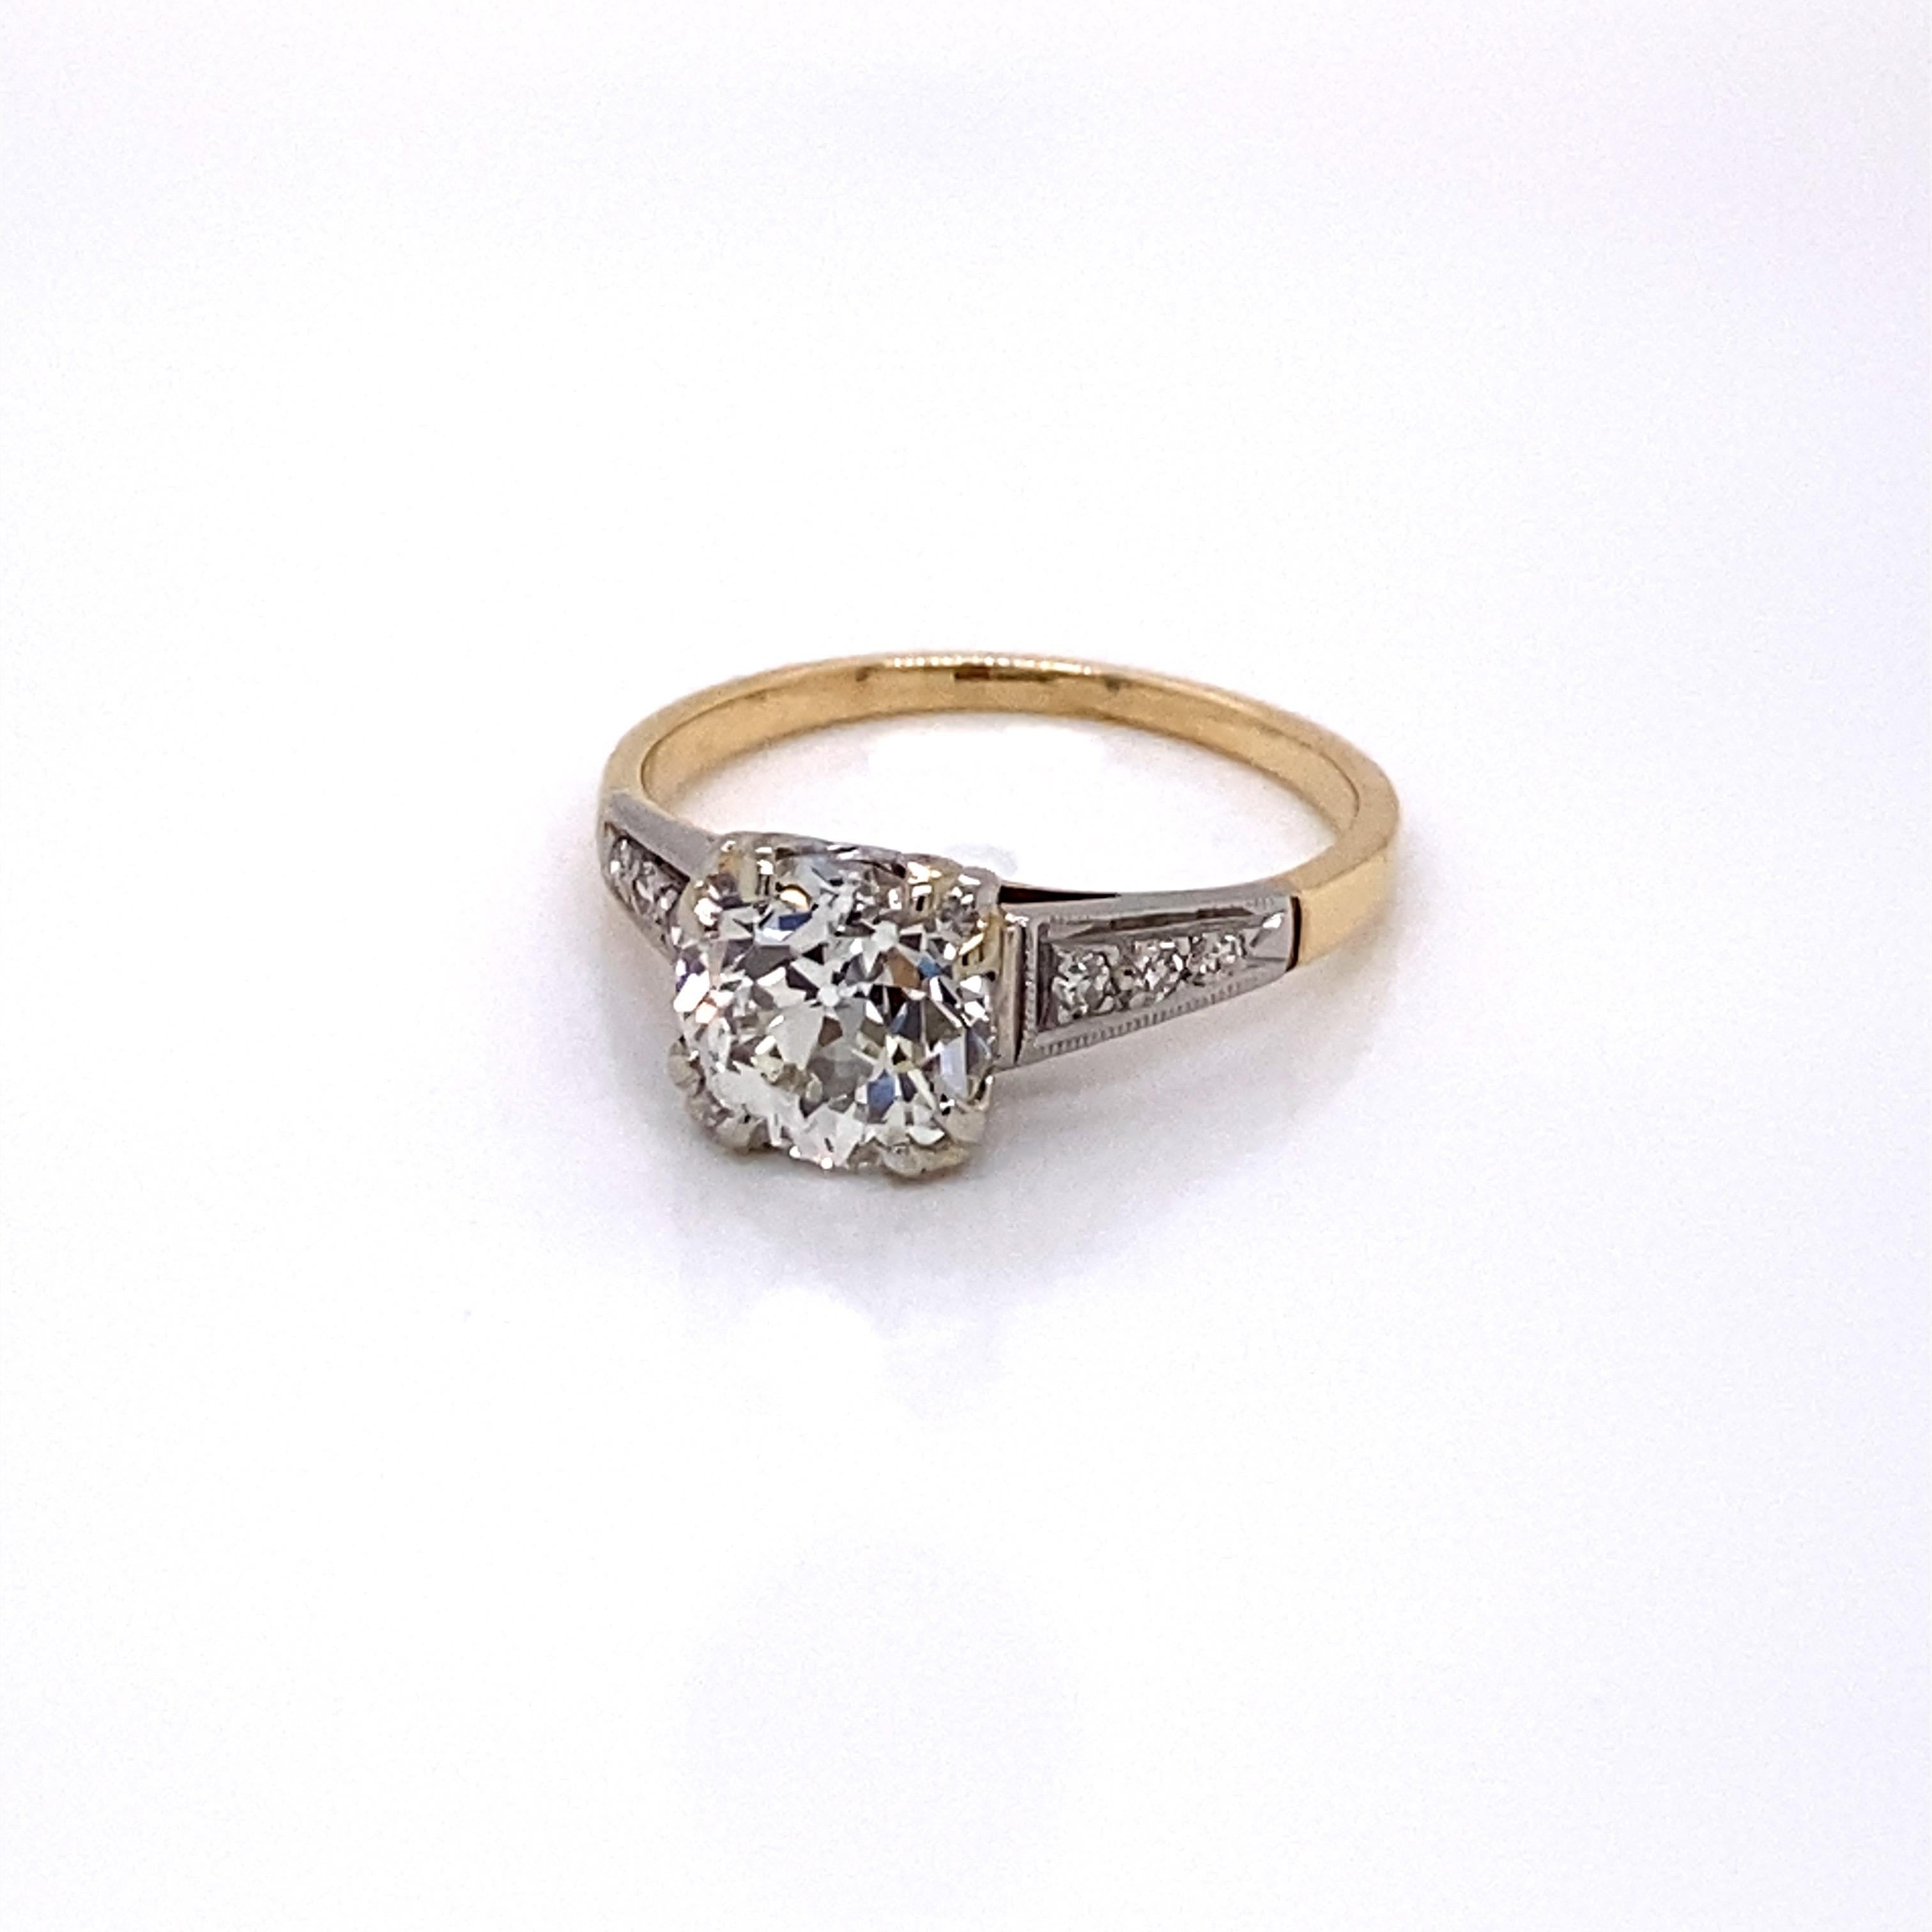 Vintage 1940s 14KY Gold and Platinum 1.56ct European Cut Diamond Engagement Ring - The center European Cut diamond weighs 1.56ct with J color and VS1 clarity. The diamond sits proudly in a platinum fishtail head. The setting has 3 single cut